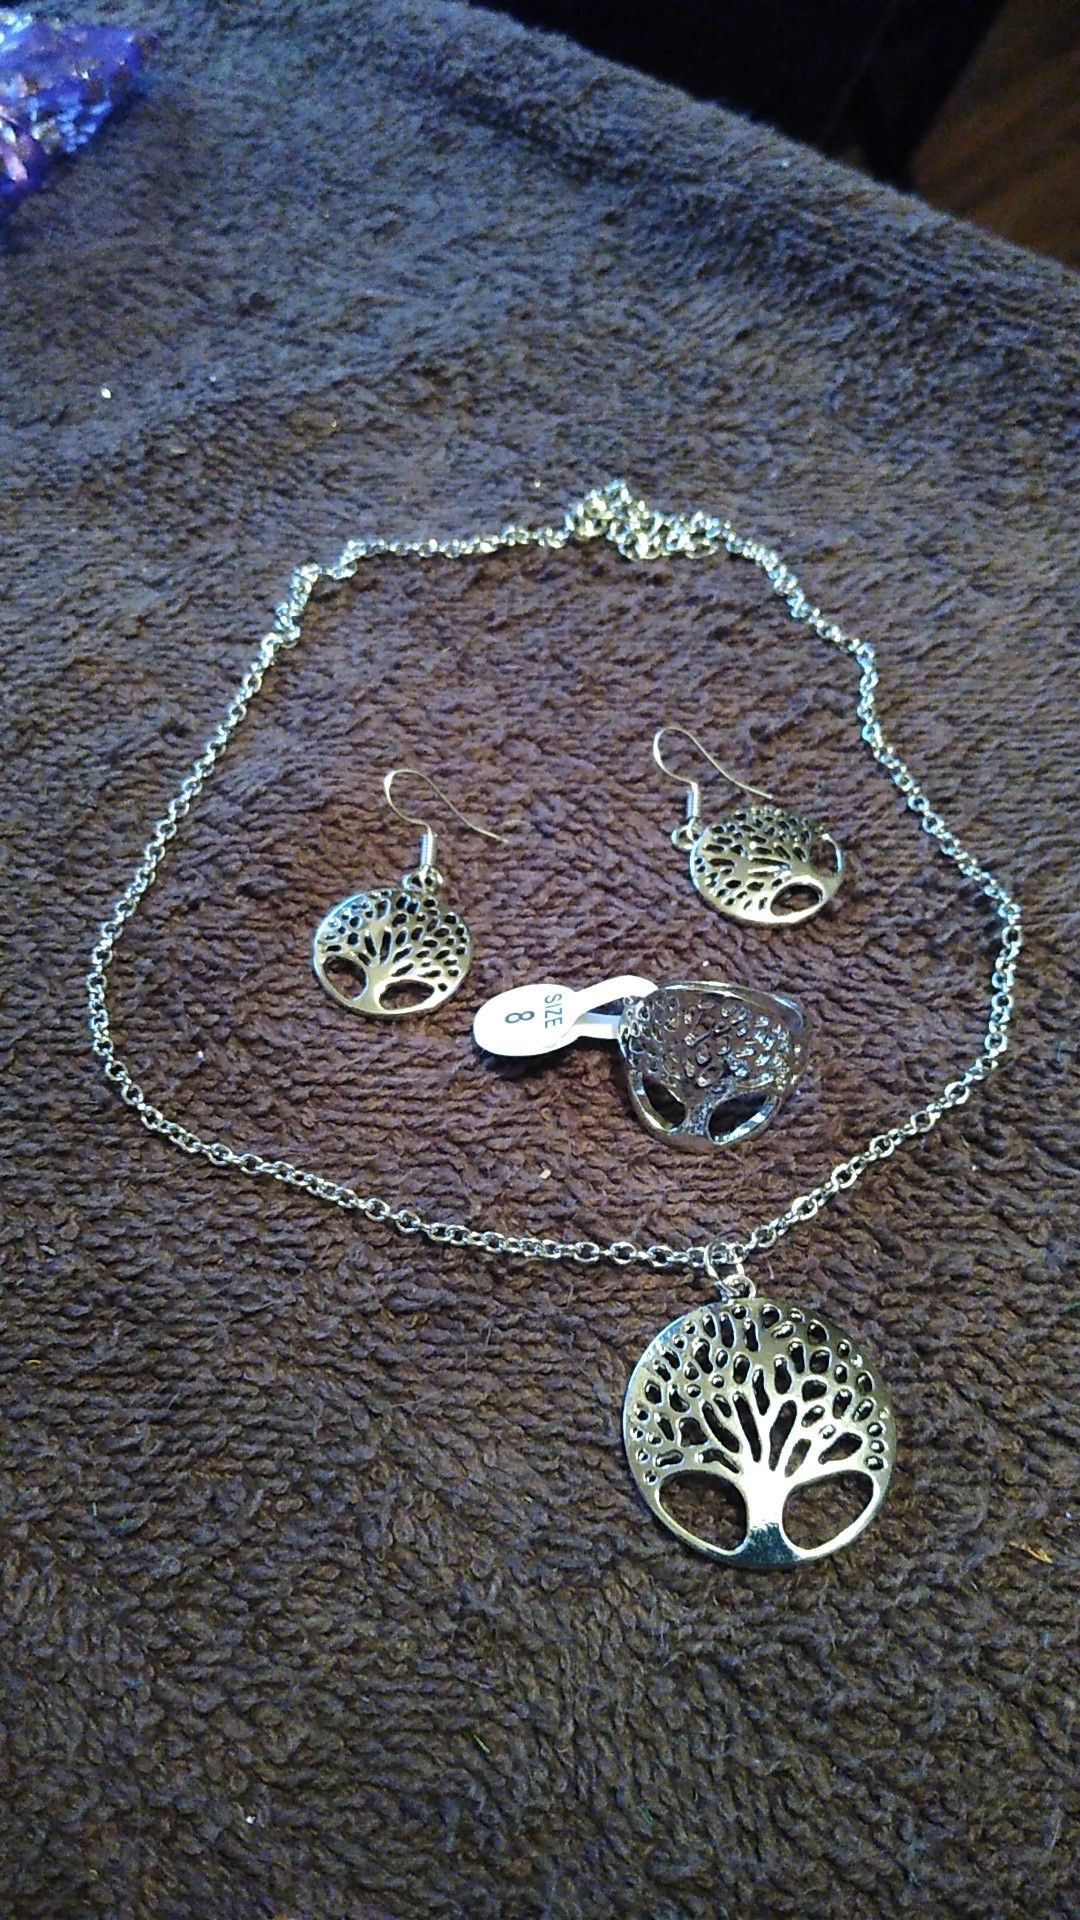 Brand new silver money tree necklace with a earrings and ring set